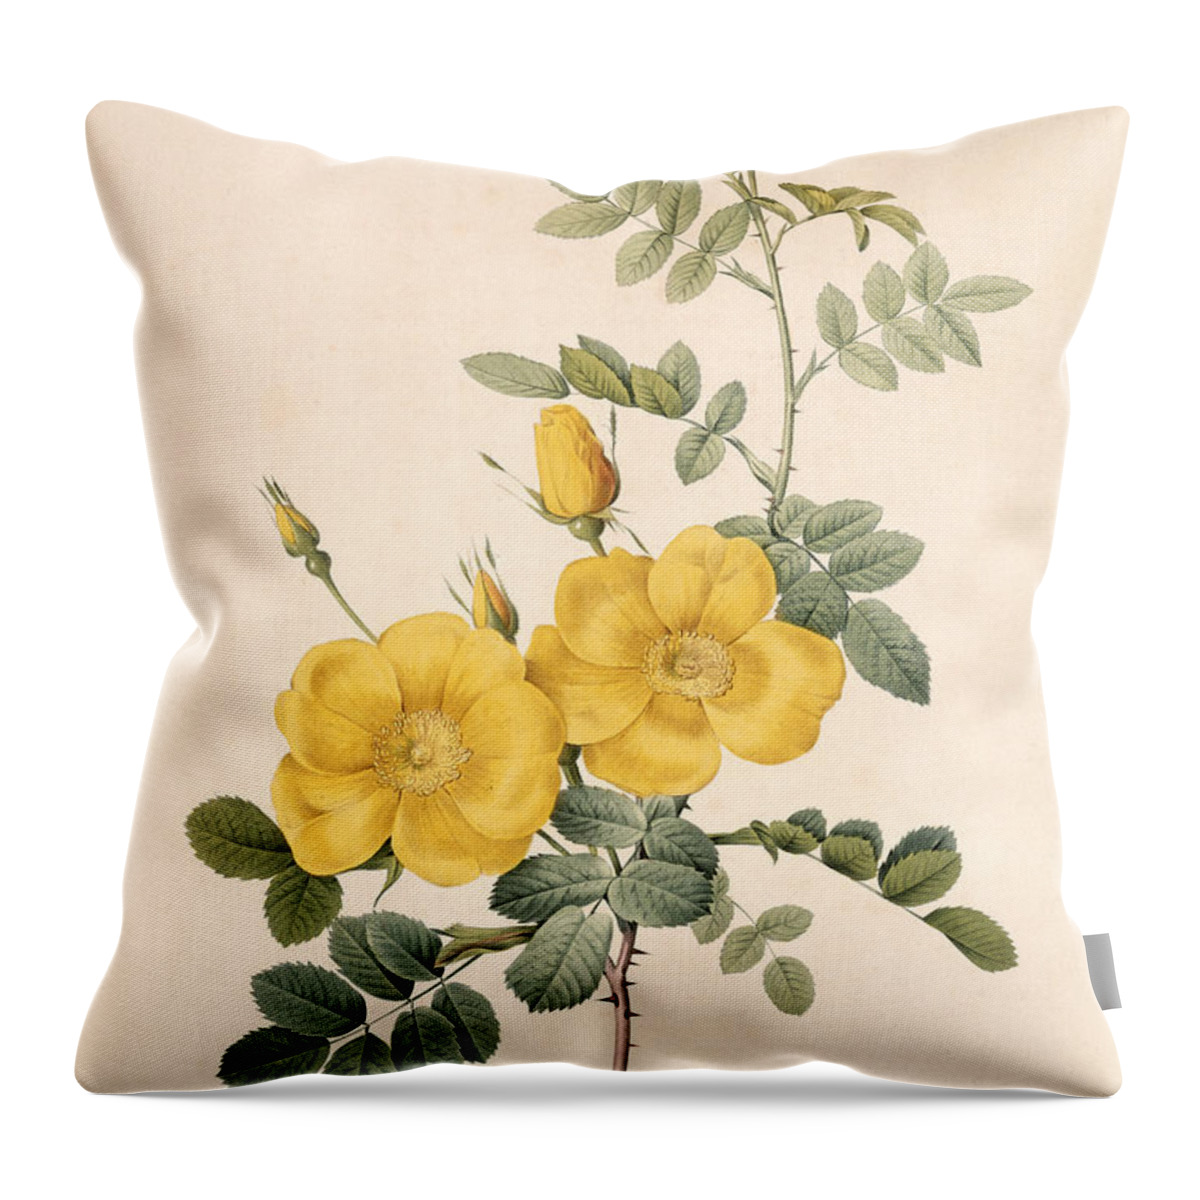 Rosa Throw Pillow featuring the drawing Rosa Eglanteria by Pierre Joseph Redoute